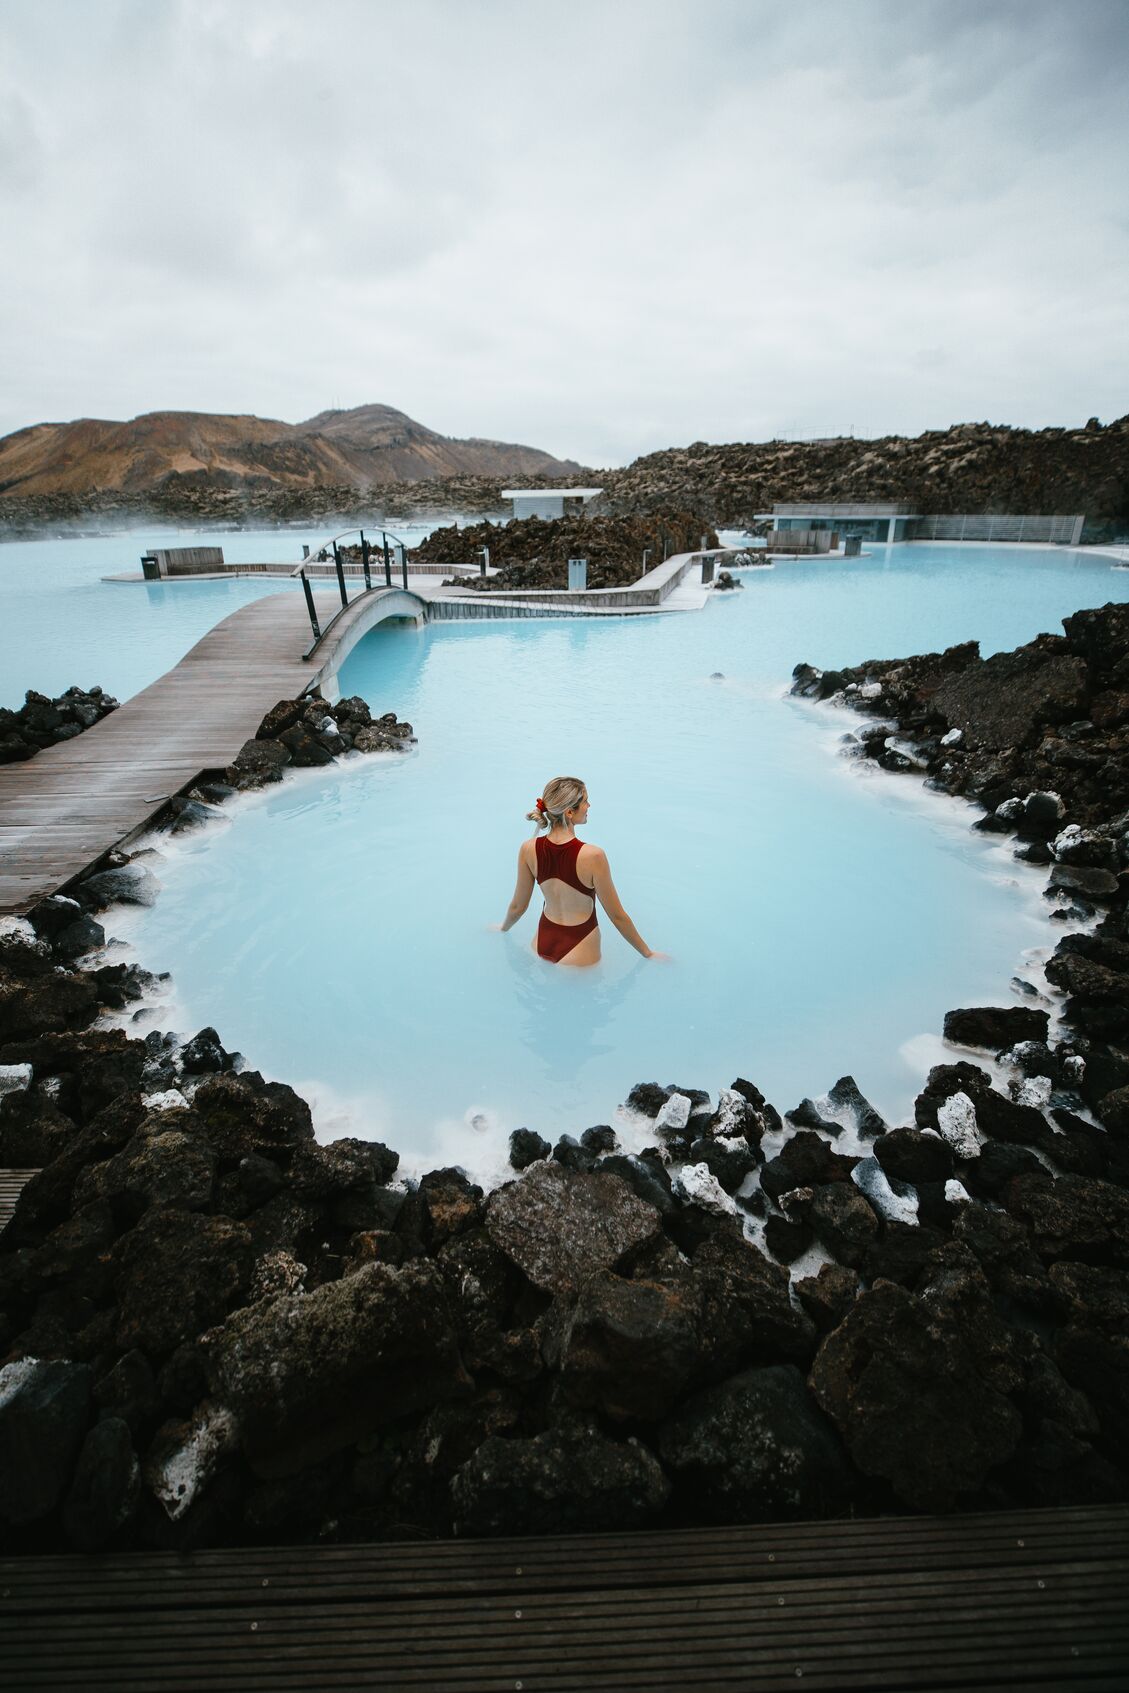 Asa Steinars pictured wearing a red bathing suit in the milky blue waters of the Blue Lagoon in Iceland